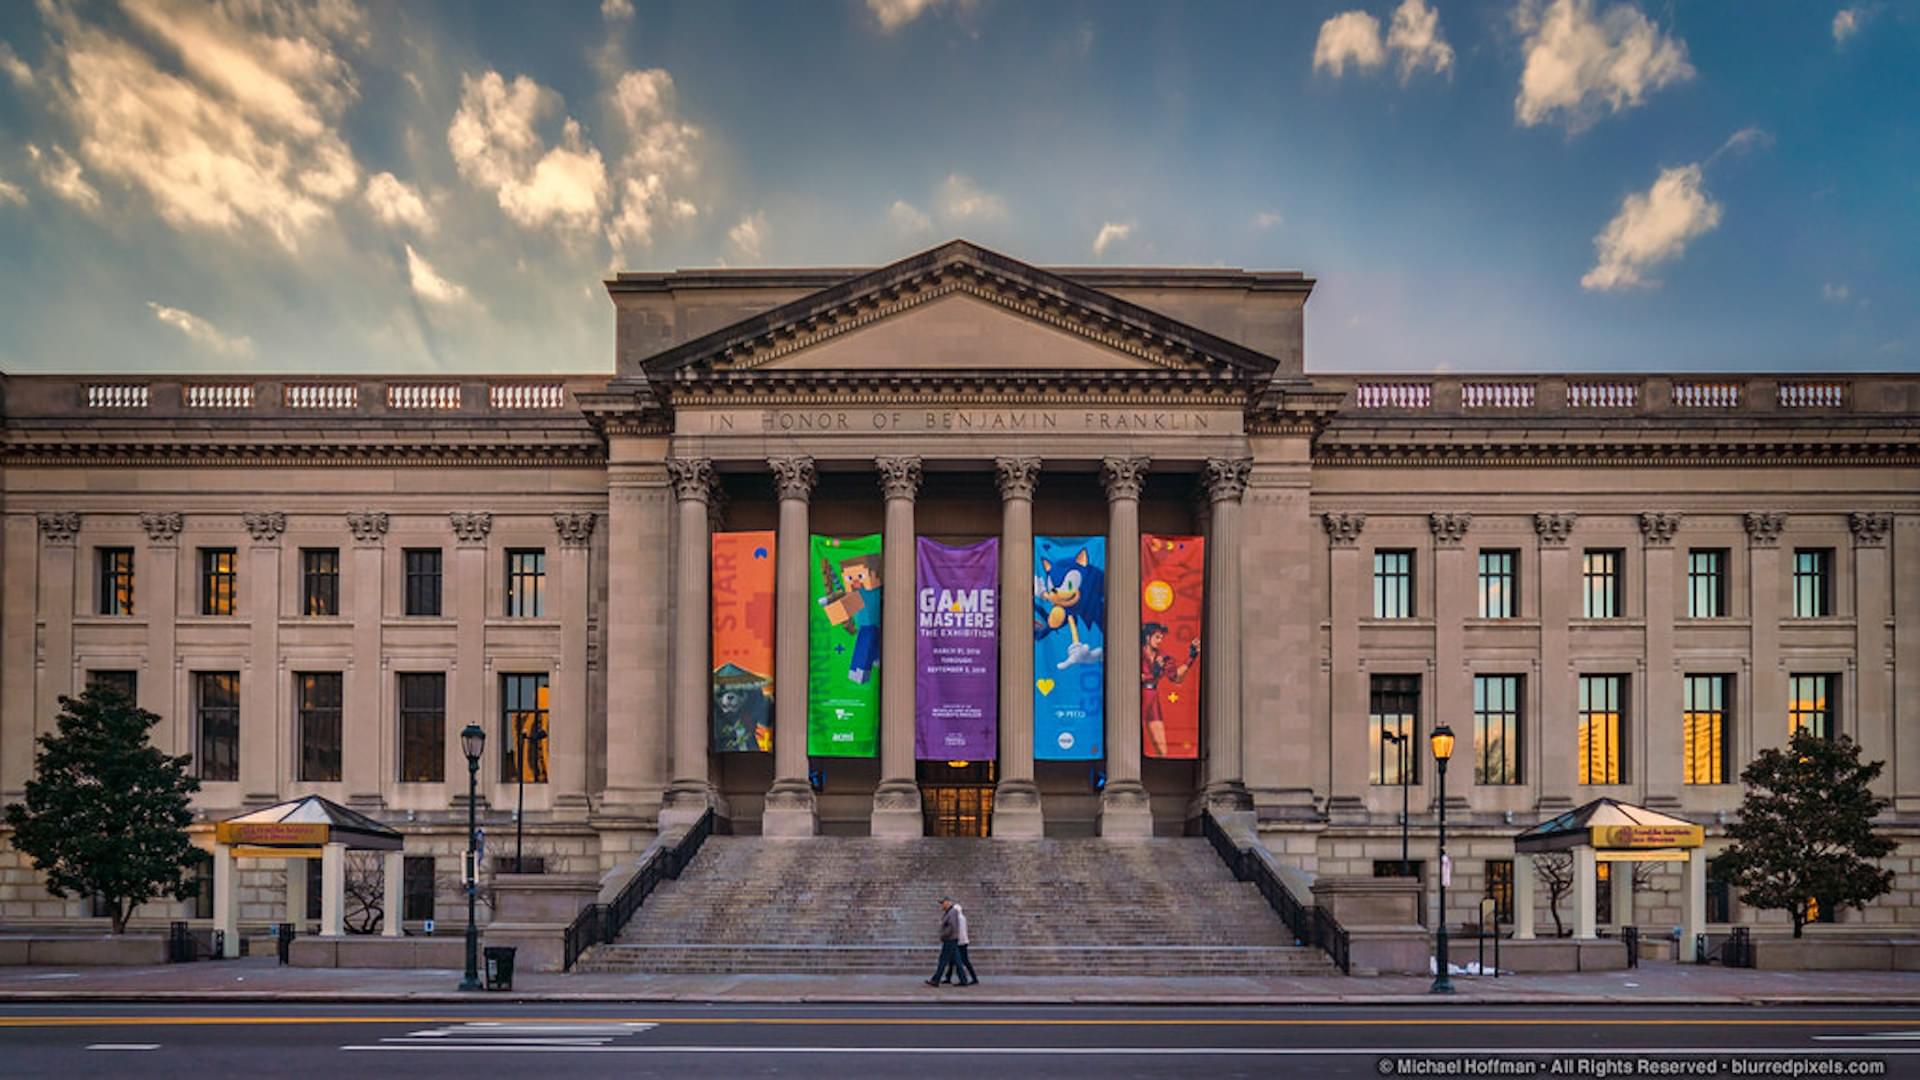 Image courtesy of The Franklin Institute